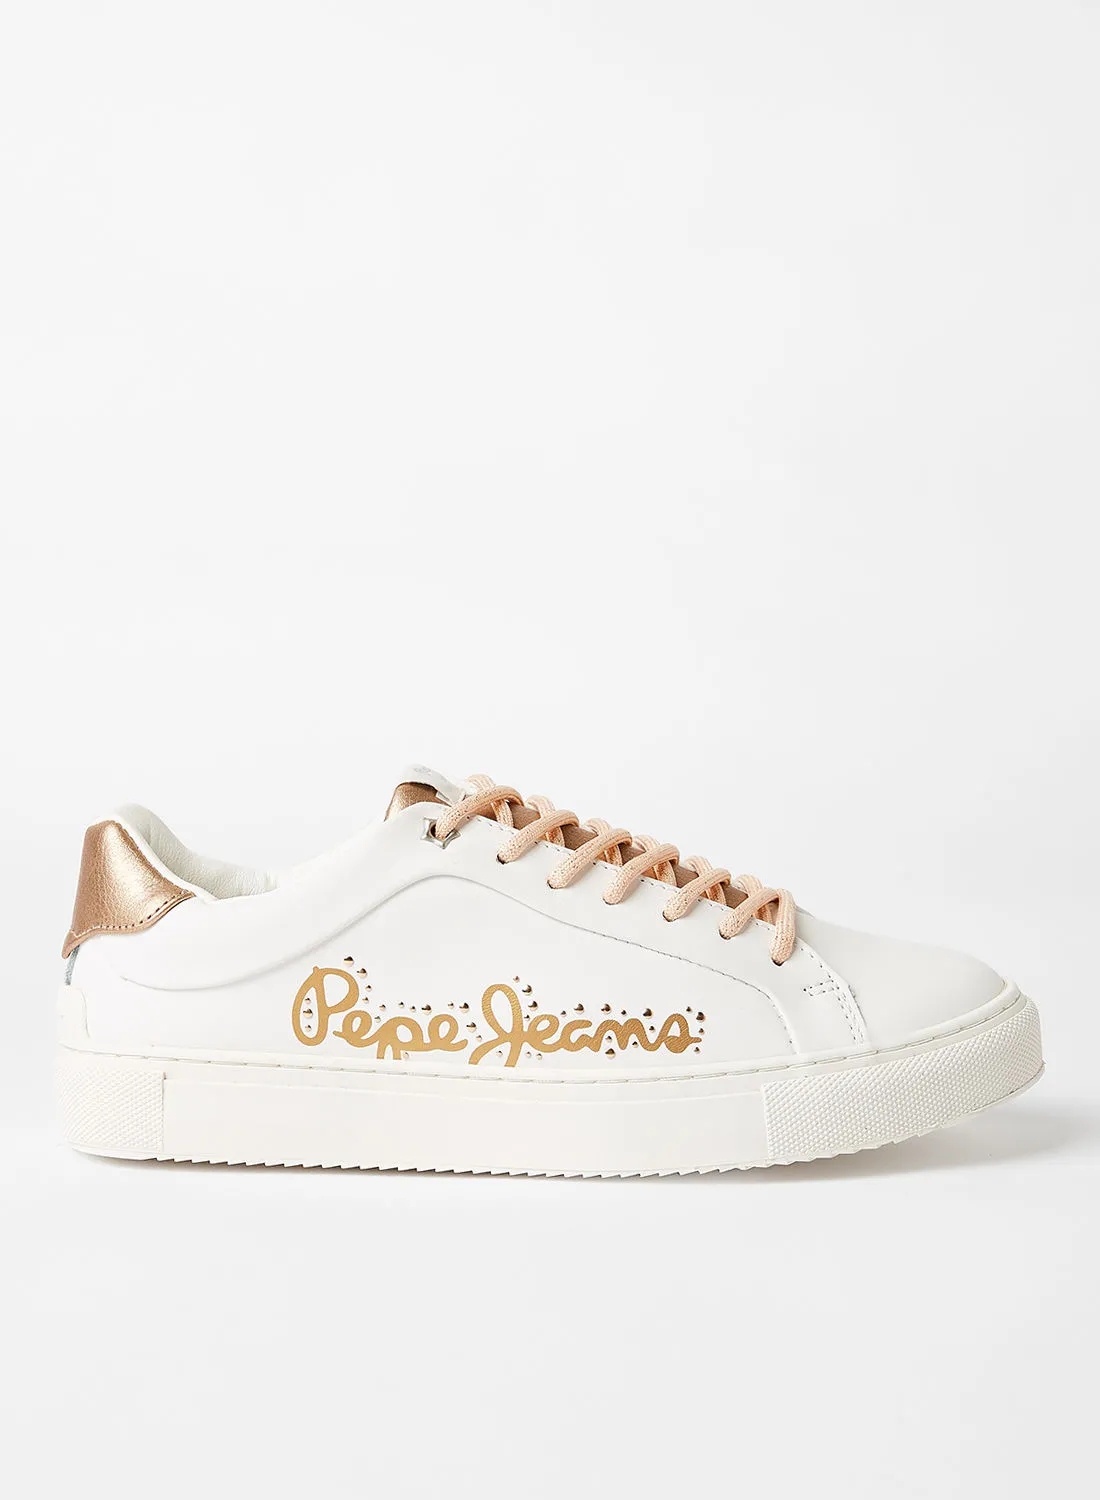 Pepe Jeans LONDON Adams Leather Sneakers White